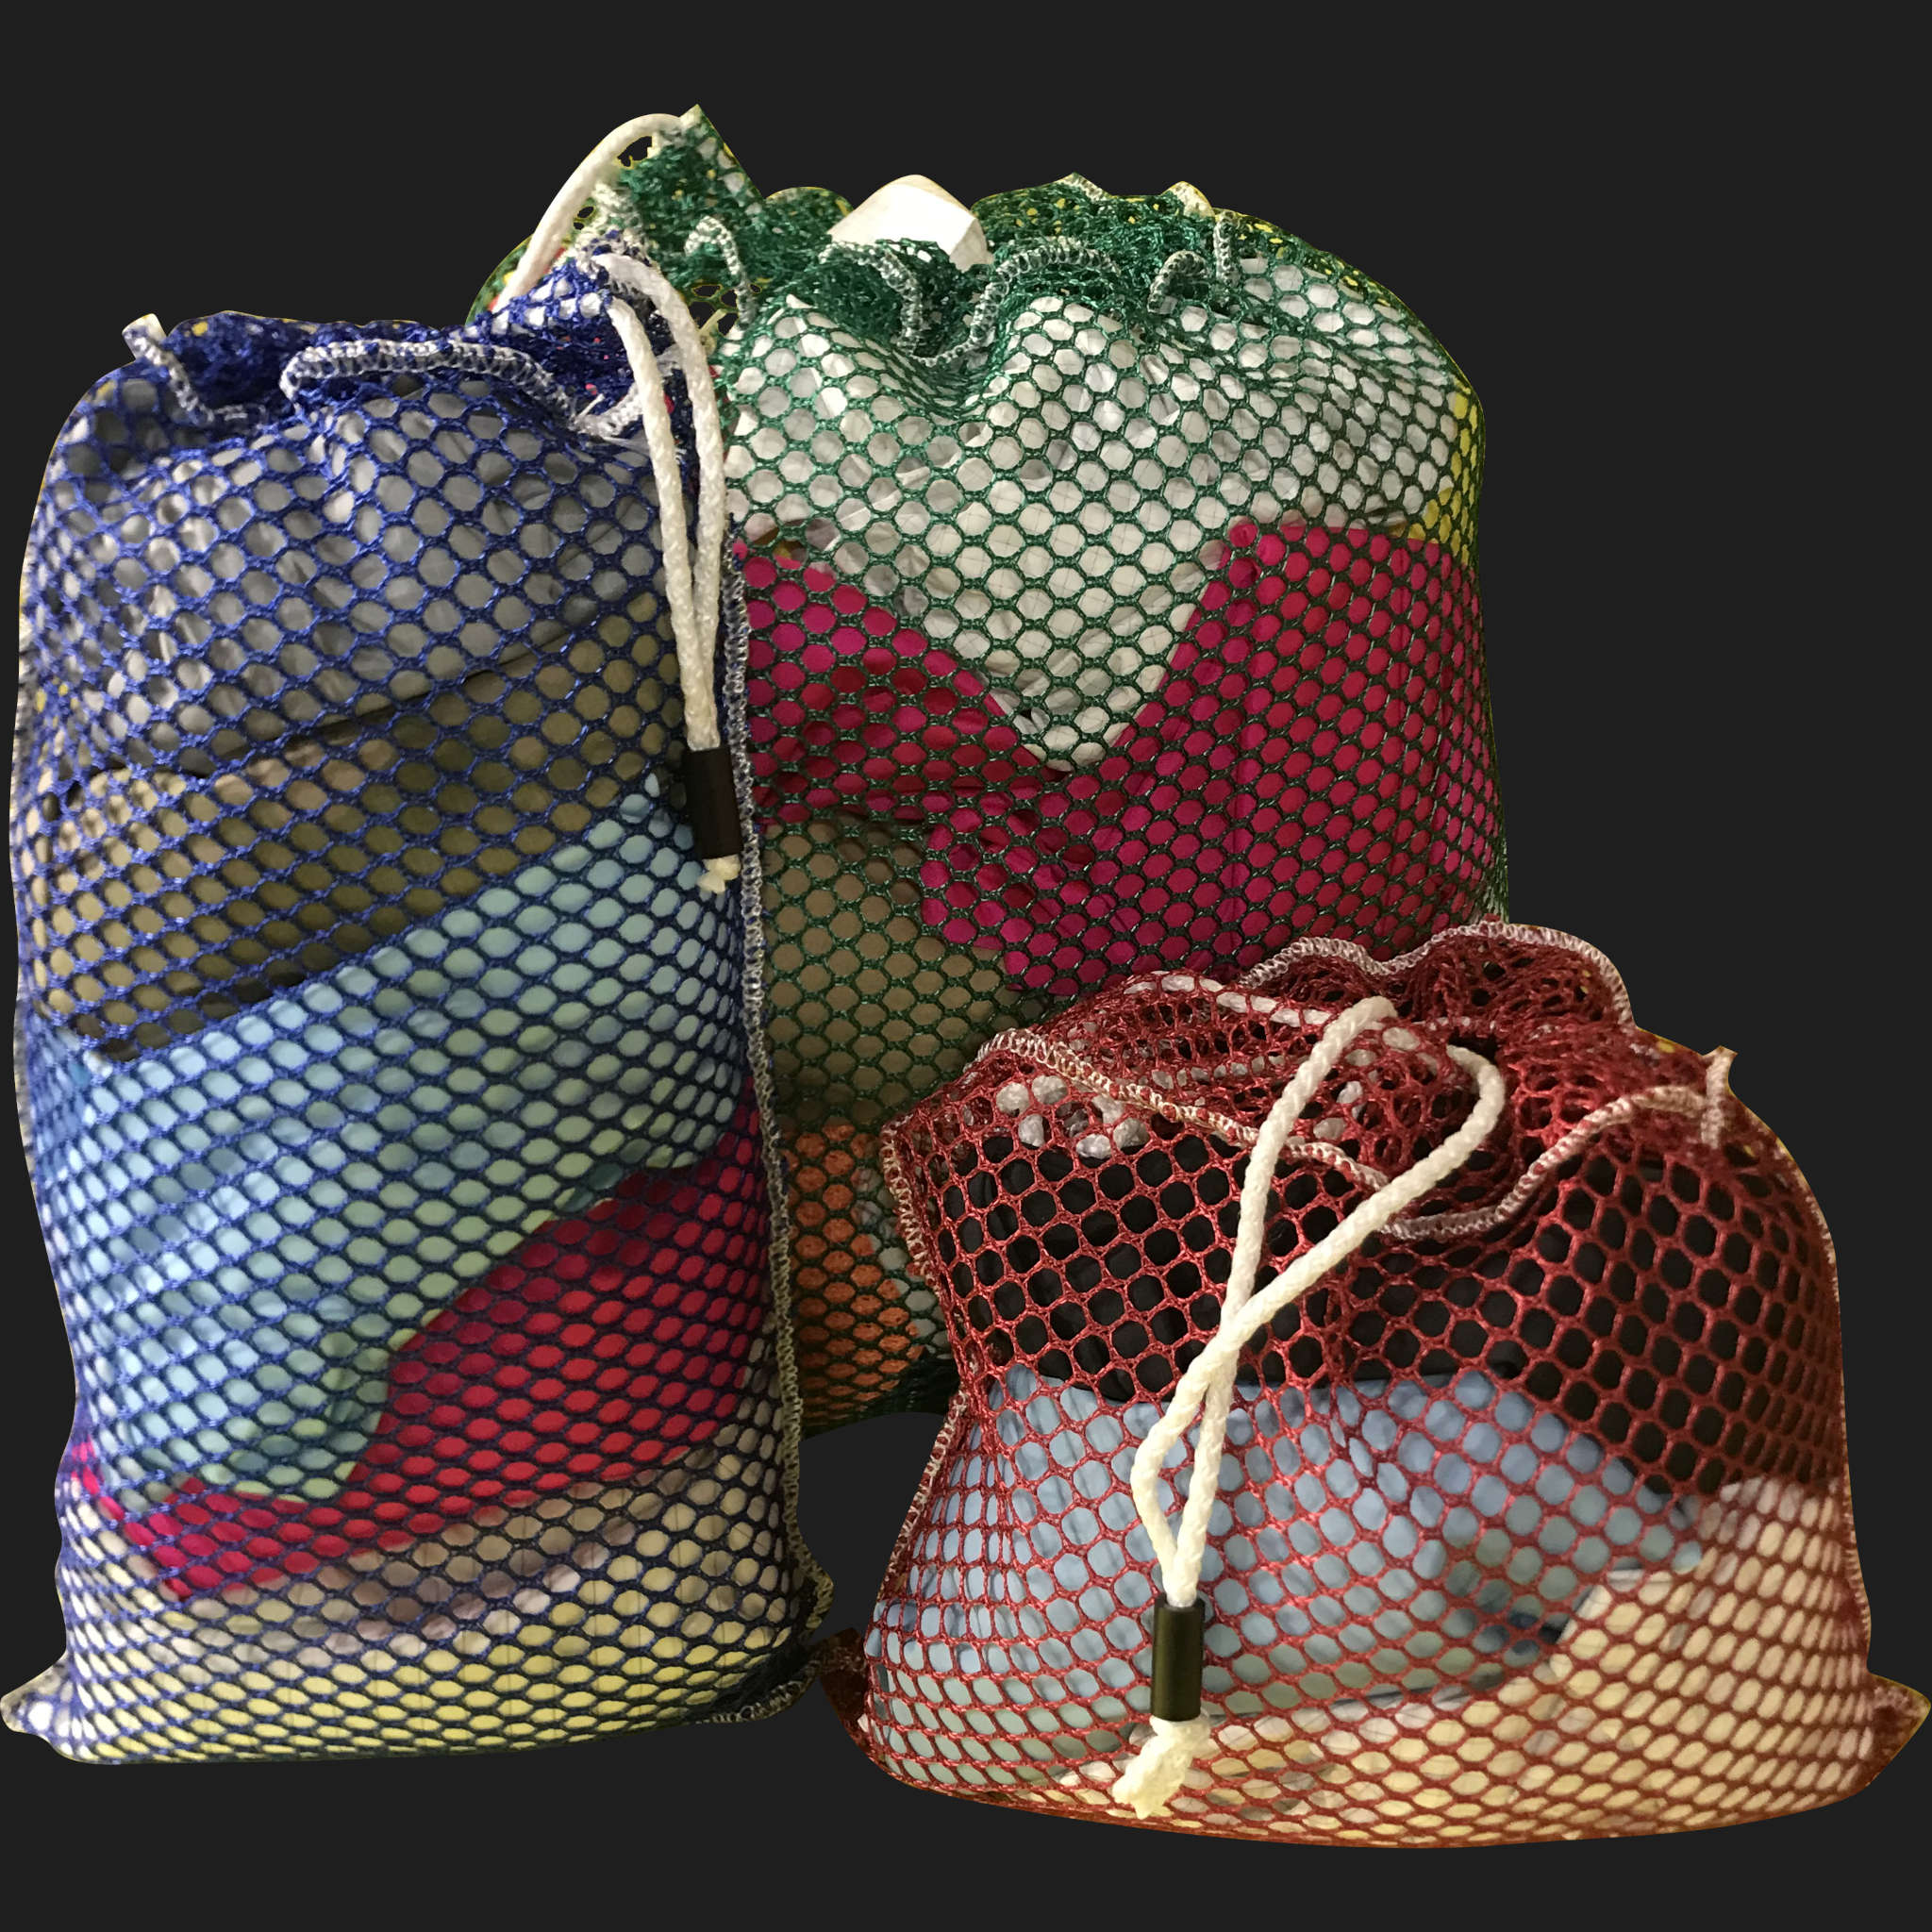 38" x 54" Customized Mesh-Net-Laundry Bags Heavy Duty with Cord and barrellock closure